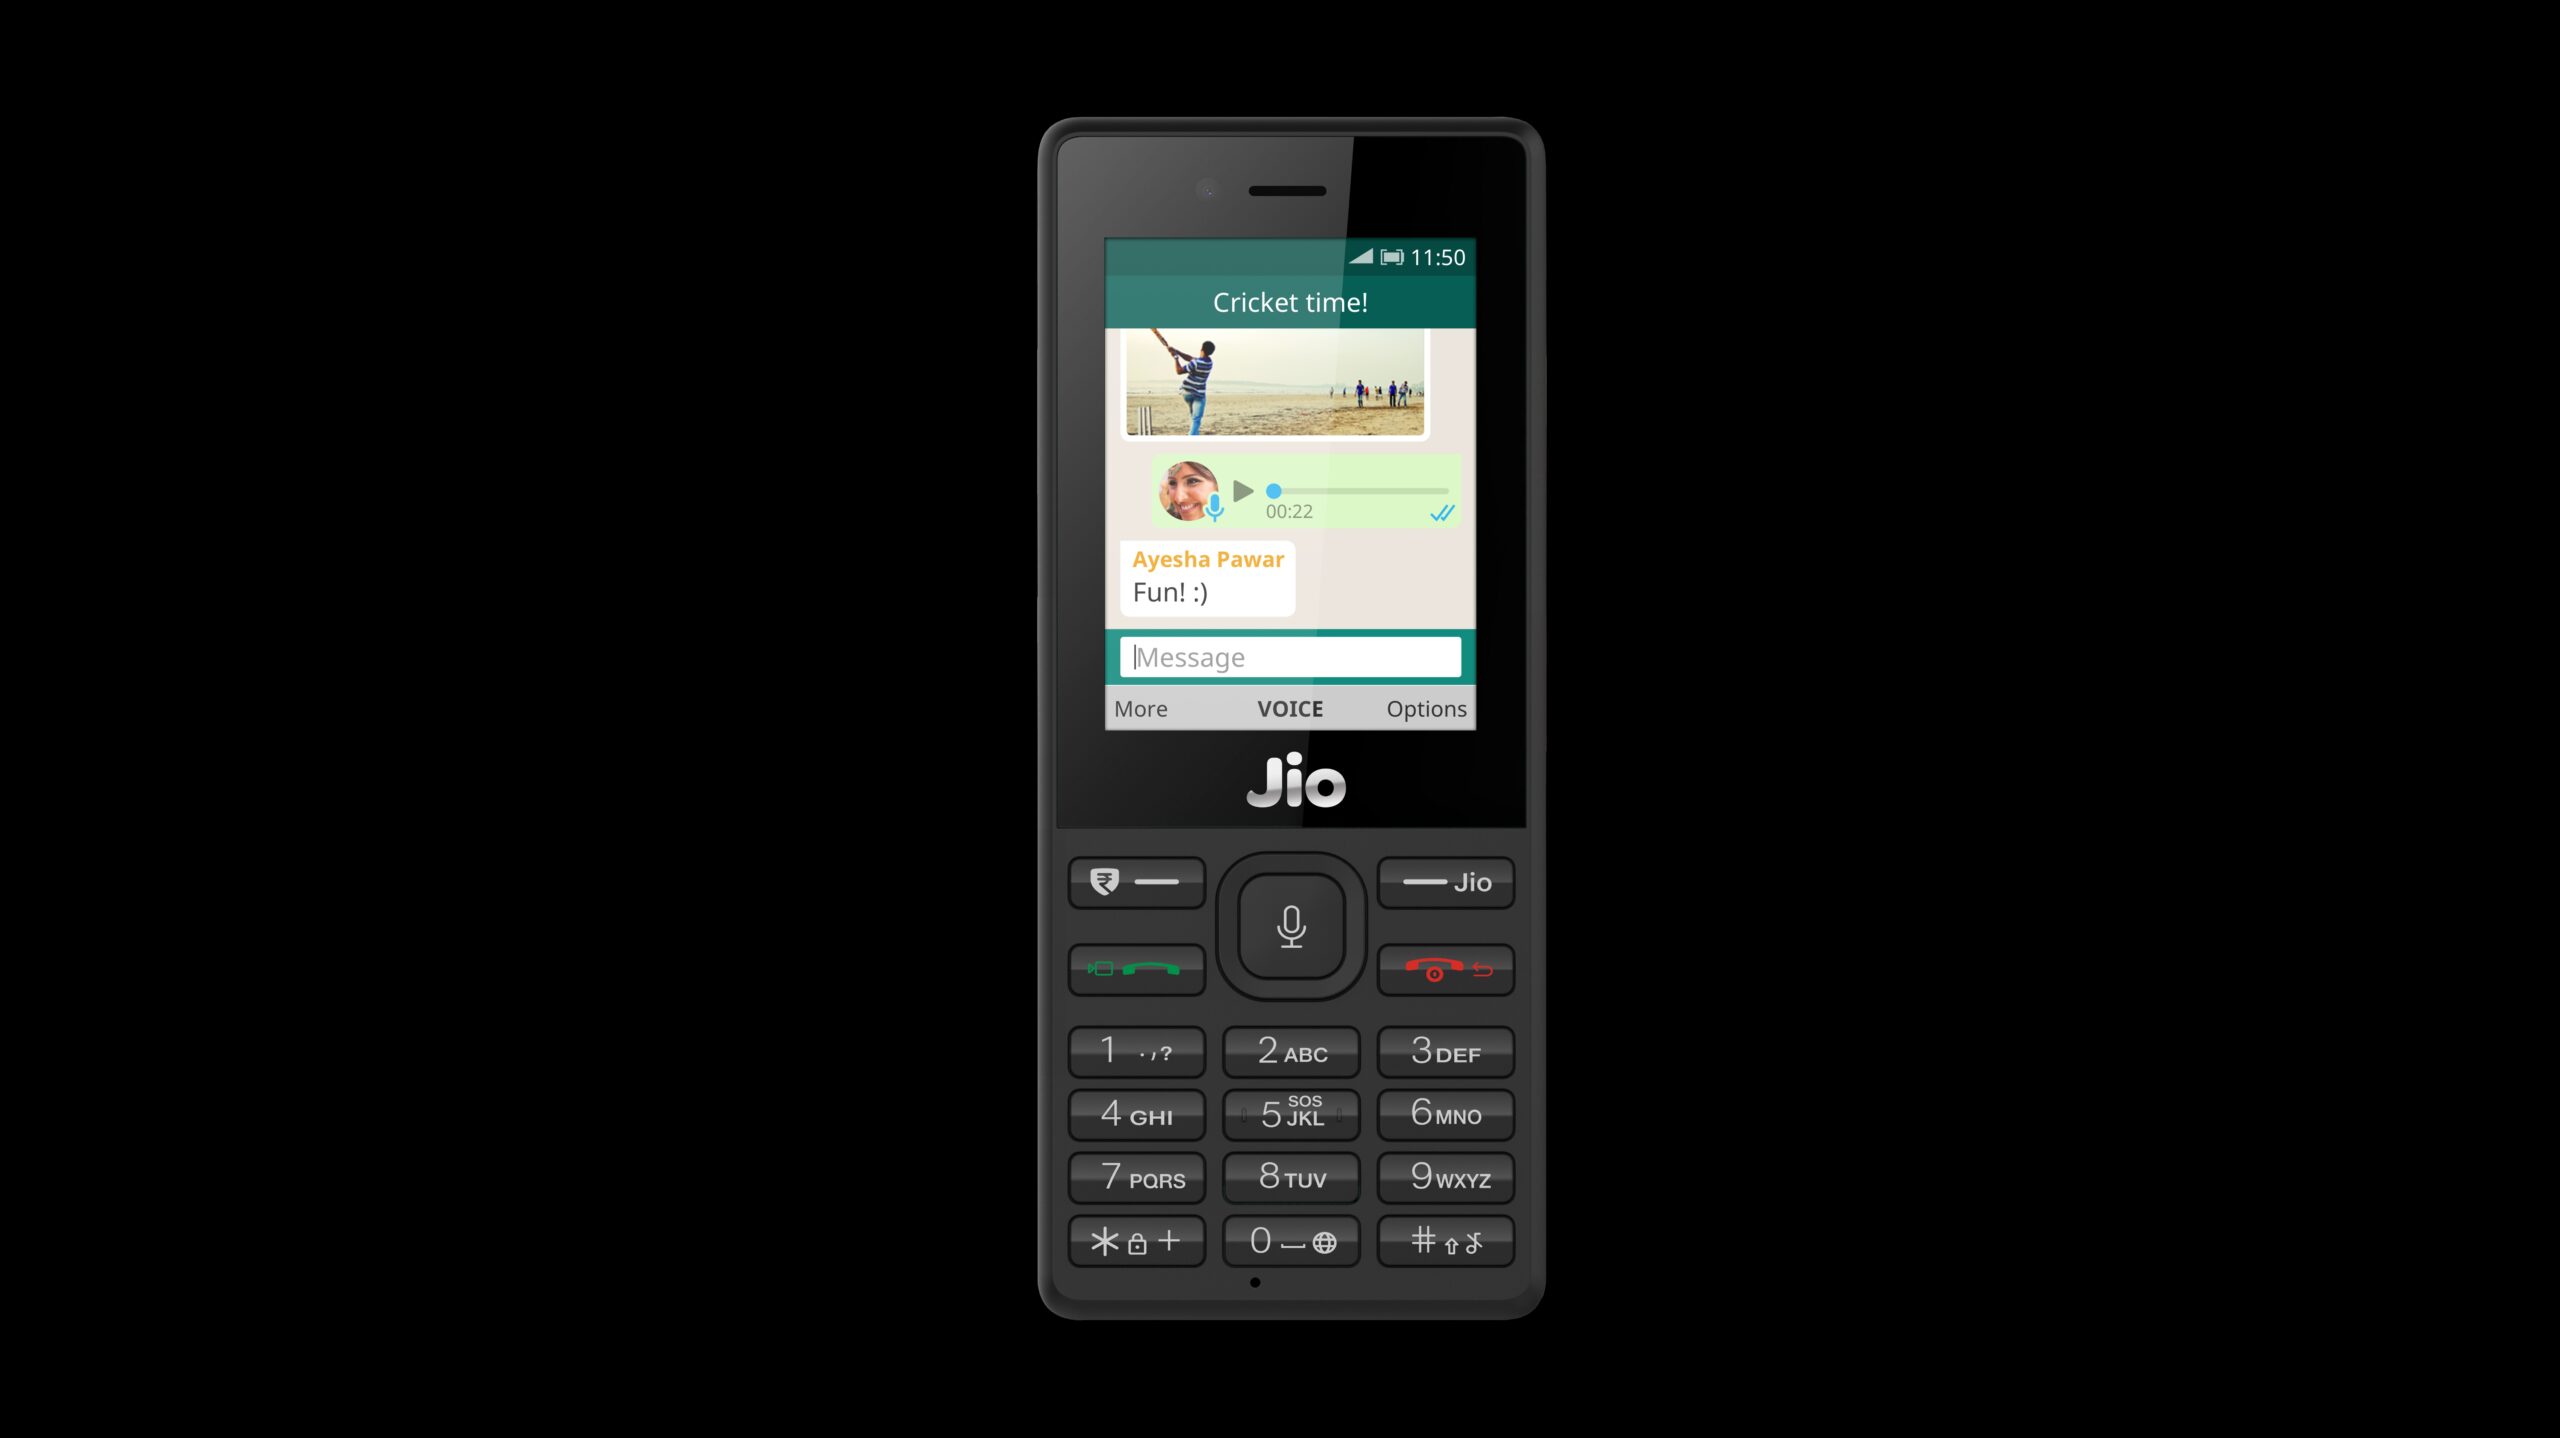 WhatsApp Messenger is now available on Reliance JioPhone, JioPhone 2